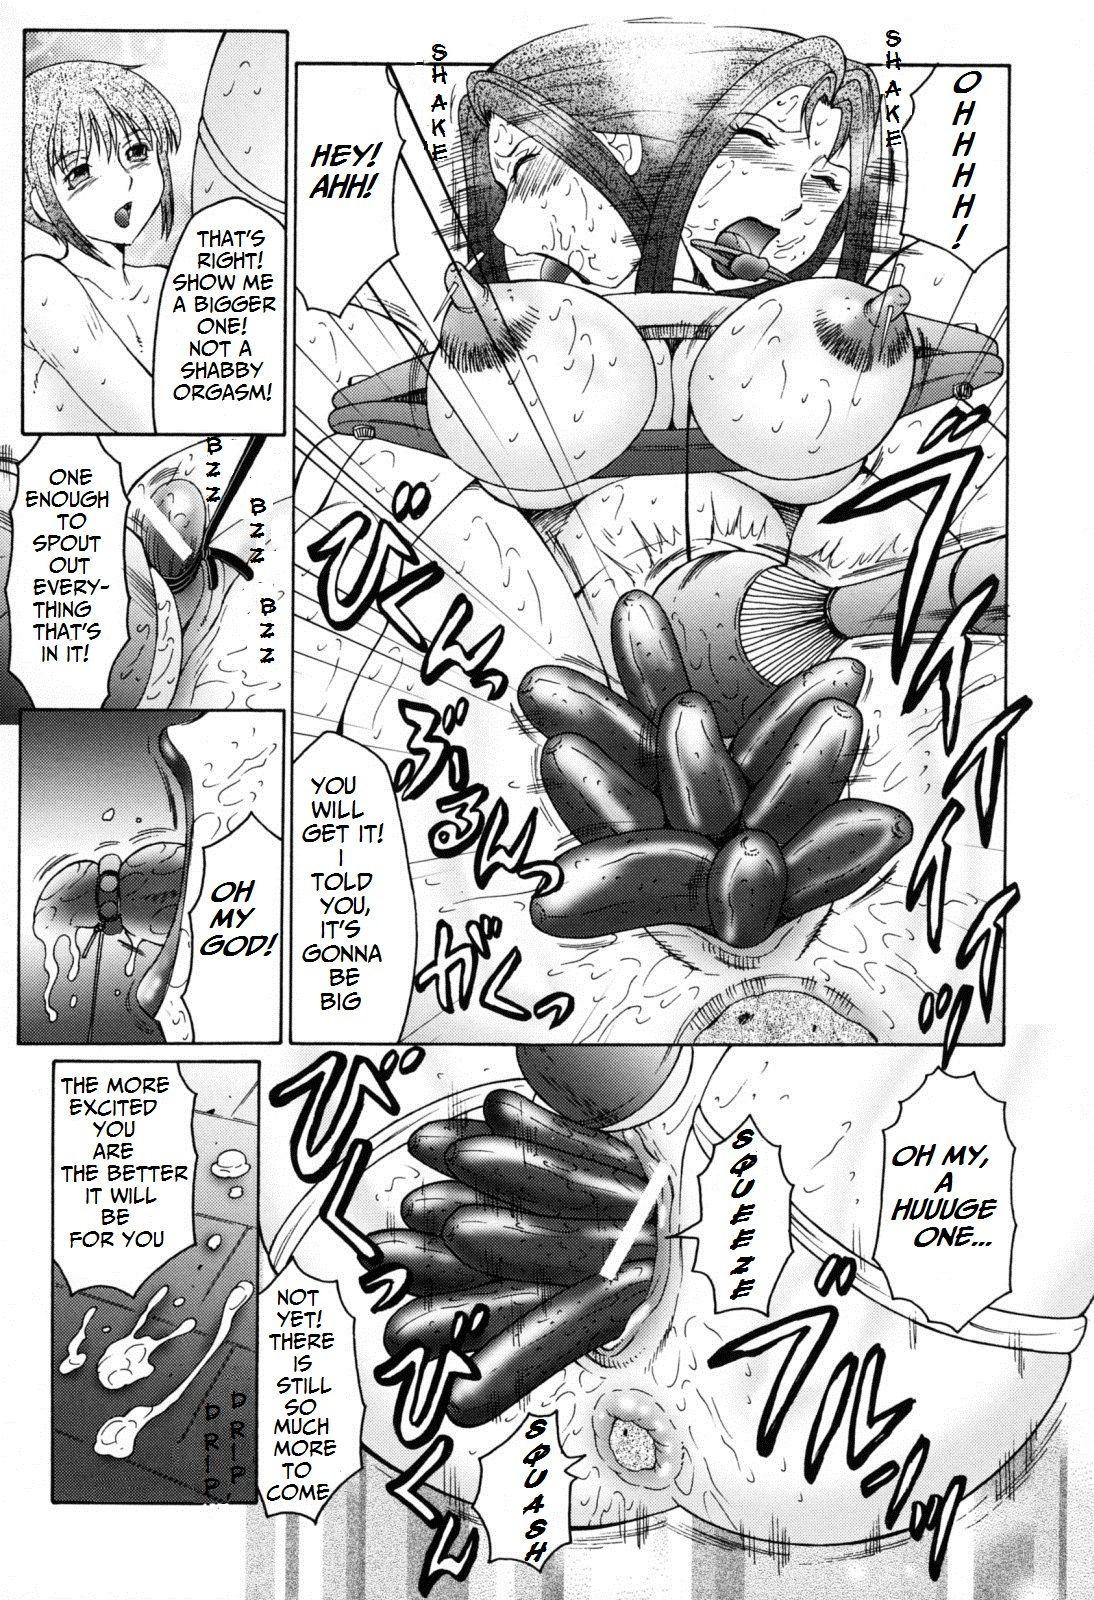 Boshino Toriko - The Captive of Mother and the Son. 2nd story 75